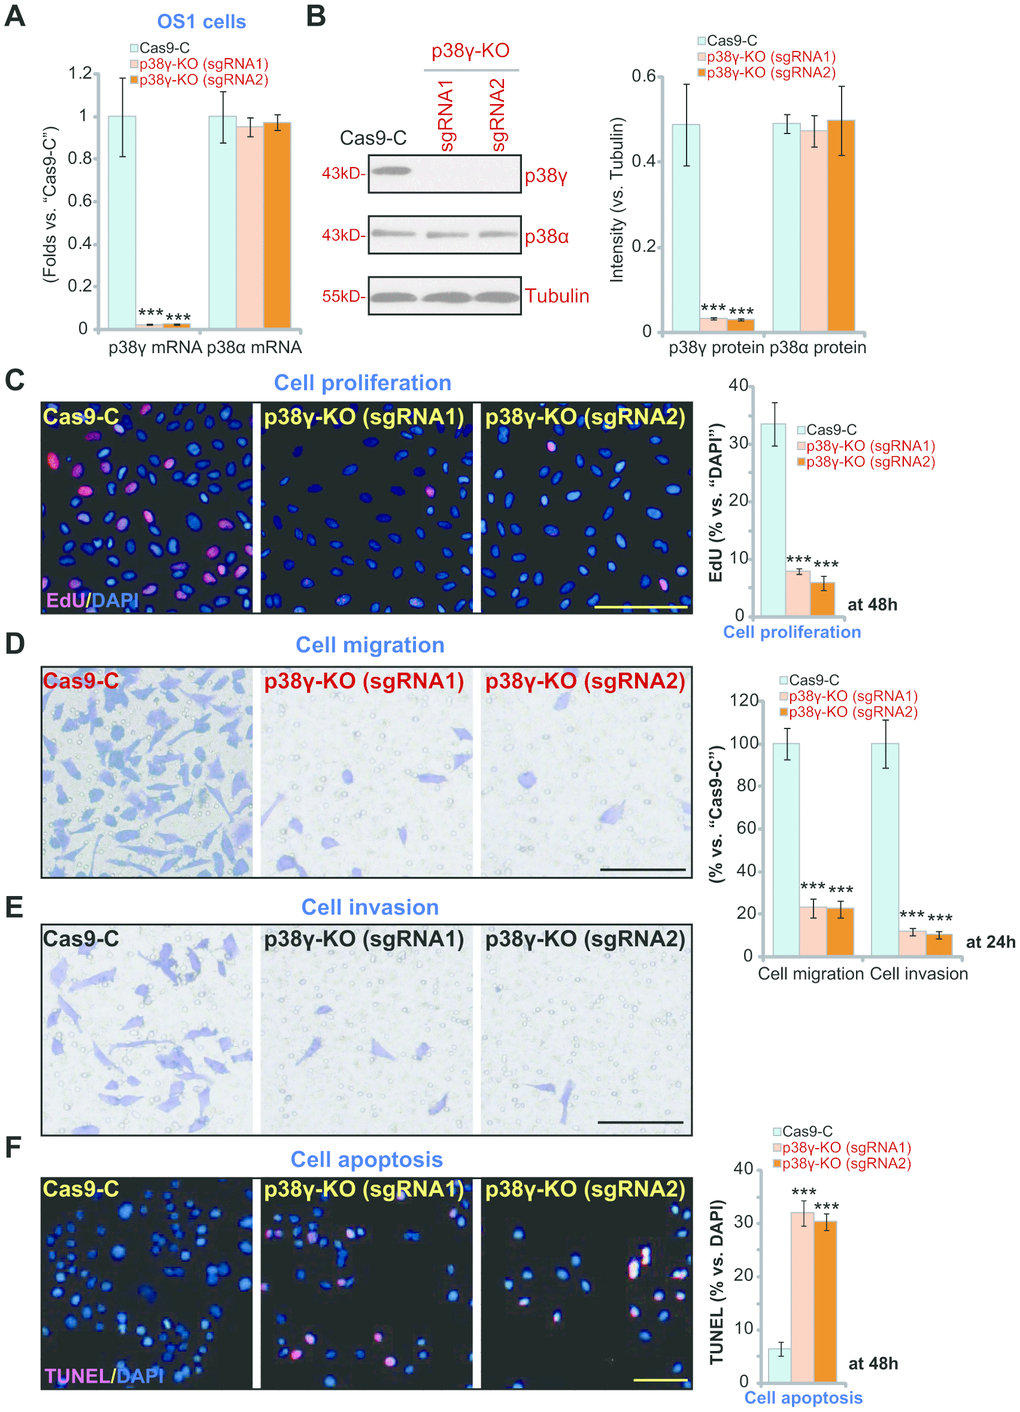 p38γ KO inhibits human OS cell progression in vitro. Expression of listed genes in the stable monoclonal OS1 cells, with the empty vector (“Cas9-C”) or the applied lenti-CRISPR/Cas9-p38γ-KO construct (with verified sgRNA, “sgRNA-1/-2”) was tested by qPCR and Western blotting assays (A, B). Cells were further cultured for applied time periods, cell proliferation (by measuring EdU ratio, C), migration (“Transwell” assay, D), invasion (“Matrigel Transwell” assay, E) and apoptosis (by measuring nuclear TUNEL ratio, F) were tested, and results quantified. Expression of listed proteins was quantified and normalized to the loading control (B). Data presented as mean ± standard deviation (SD, n=5). *** pC–F).